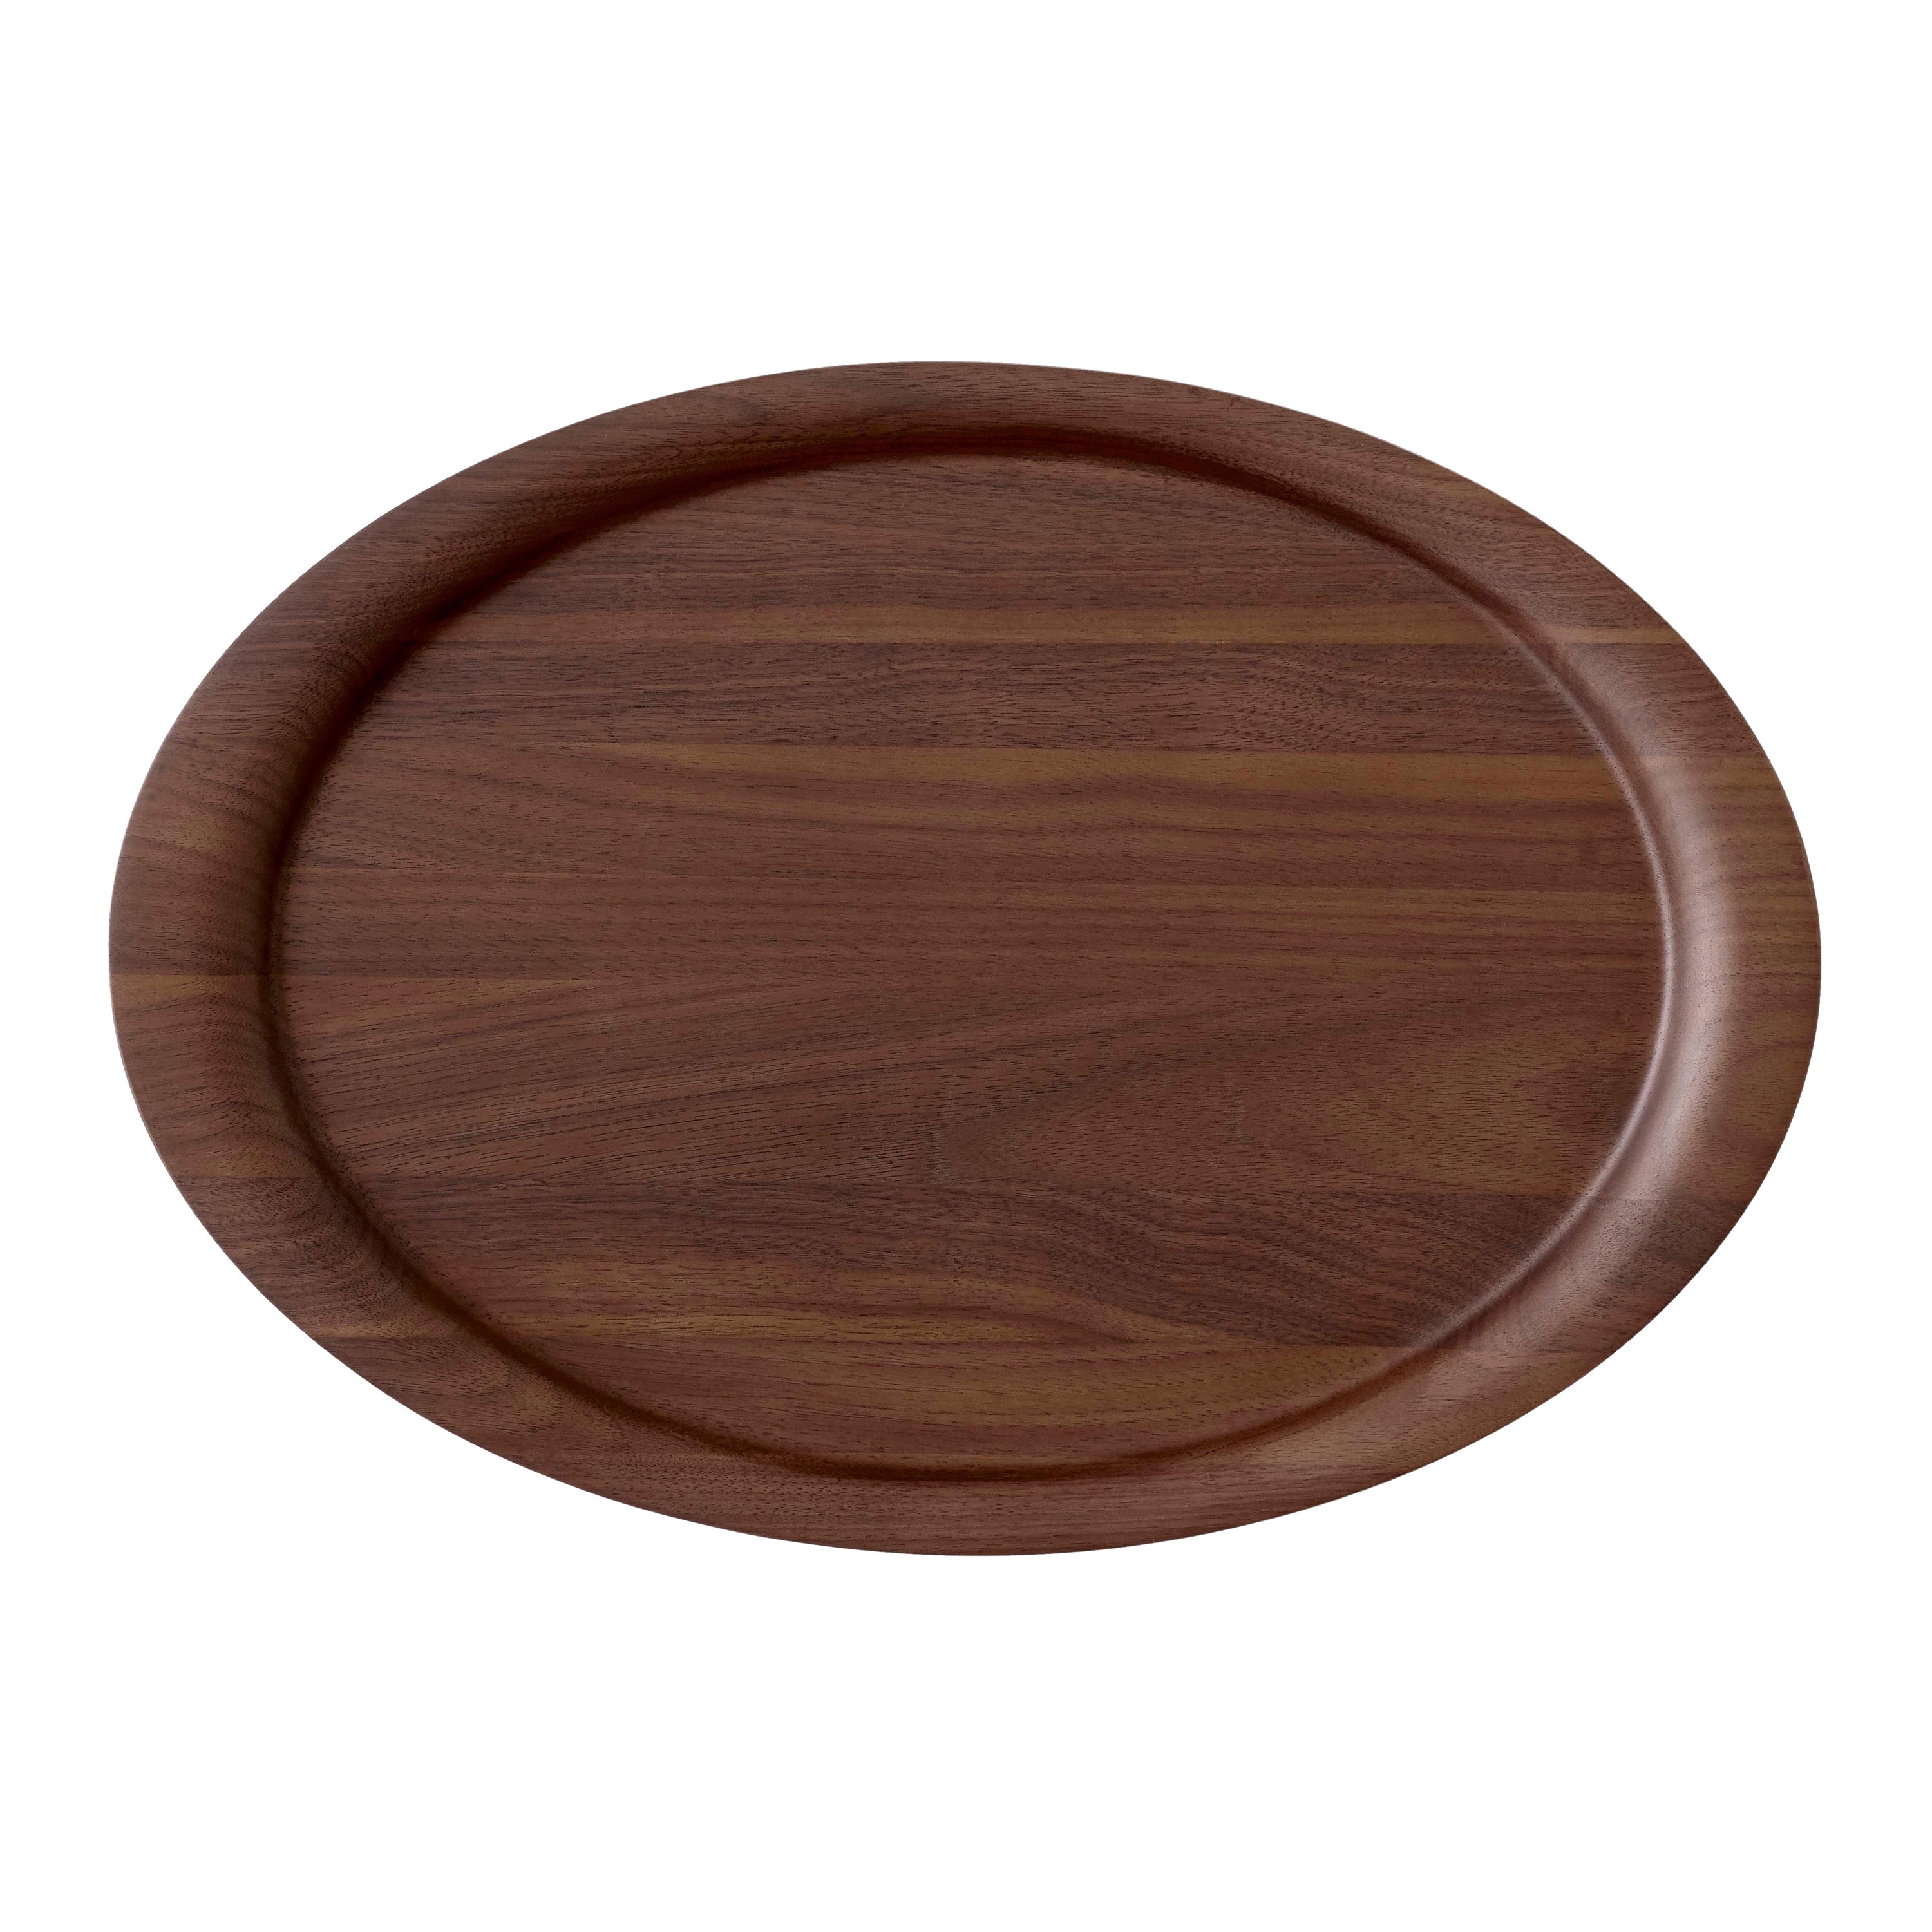 Collect Tray, SC64, Lacquered Walnut by Space Copenhagen for &Tradition